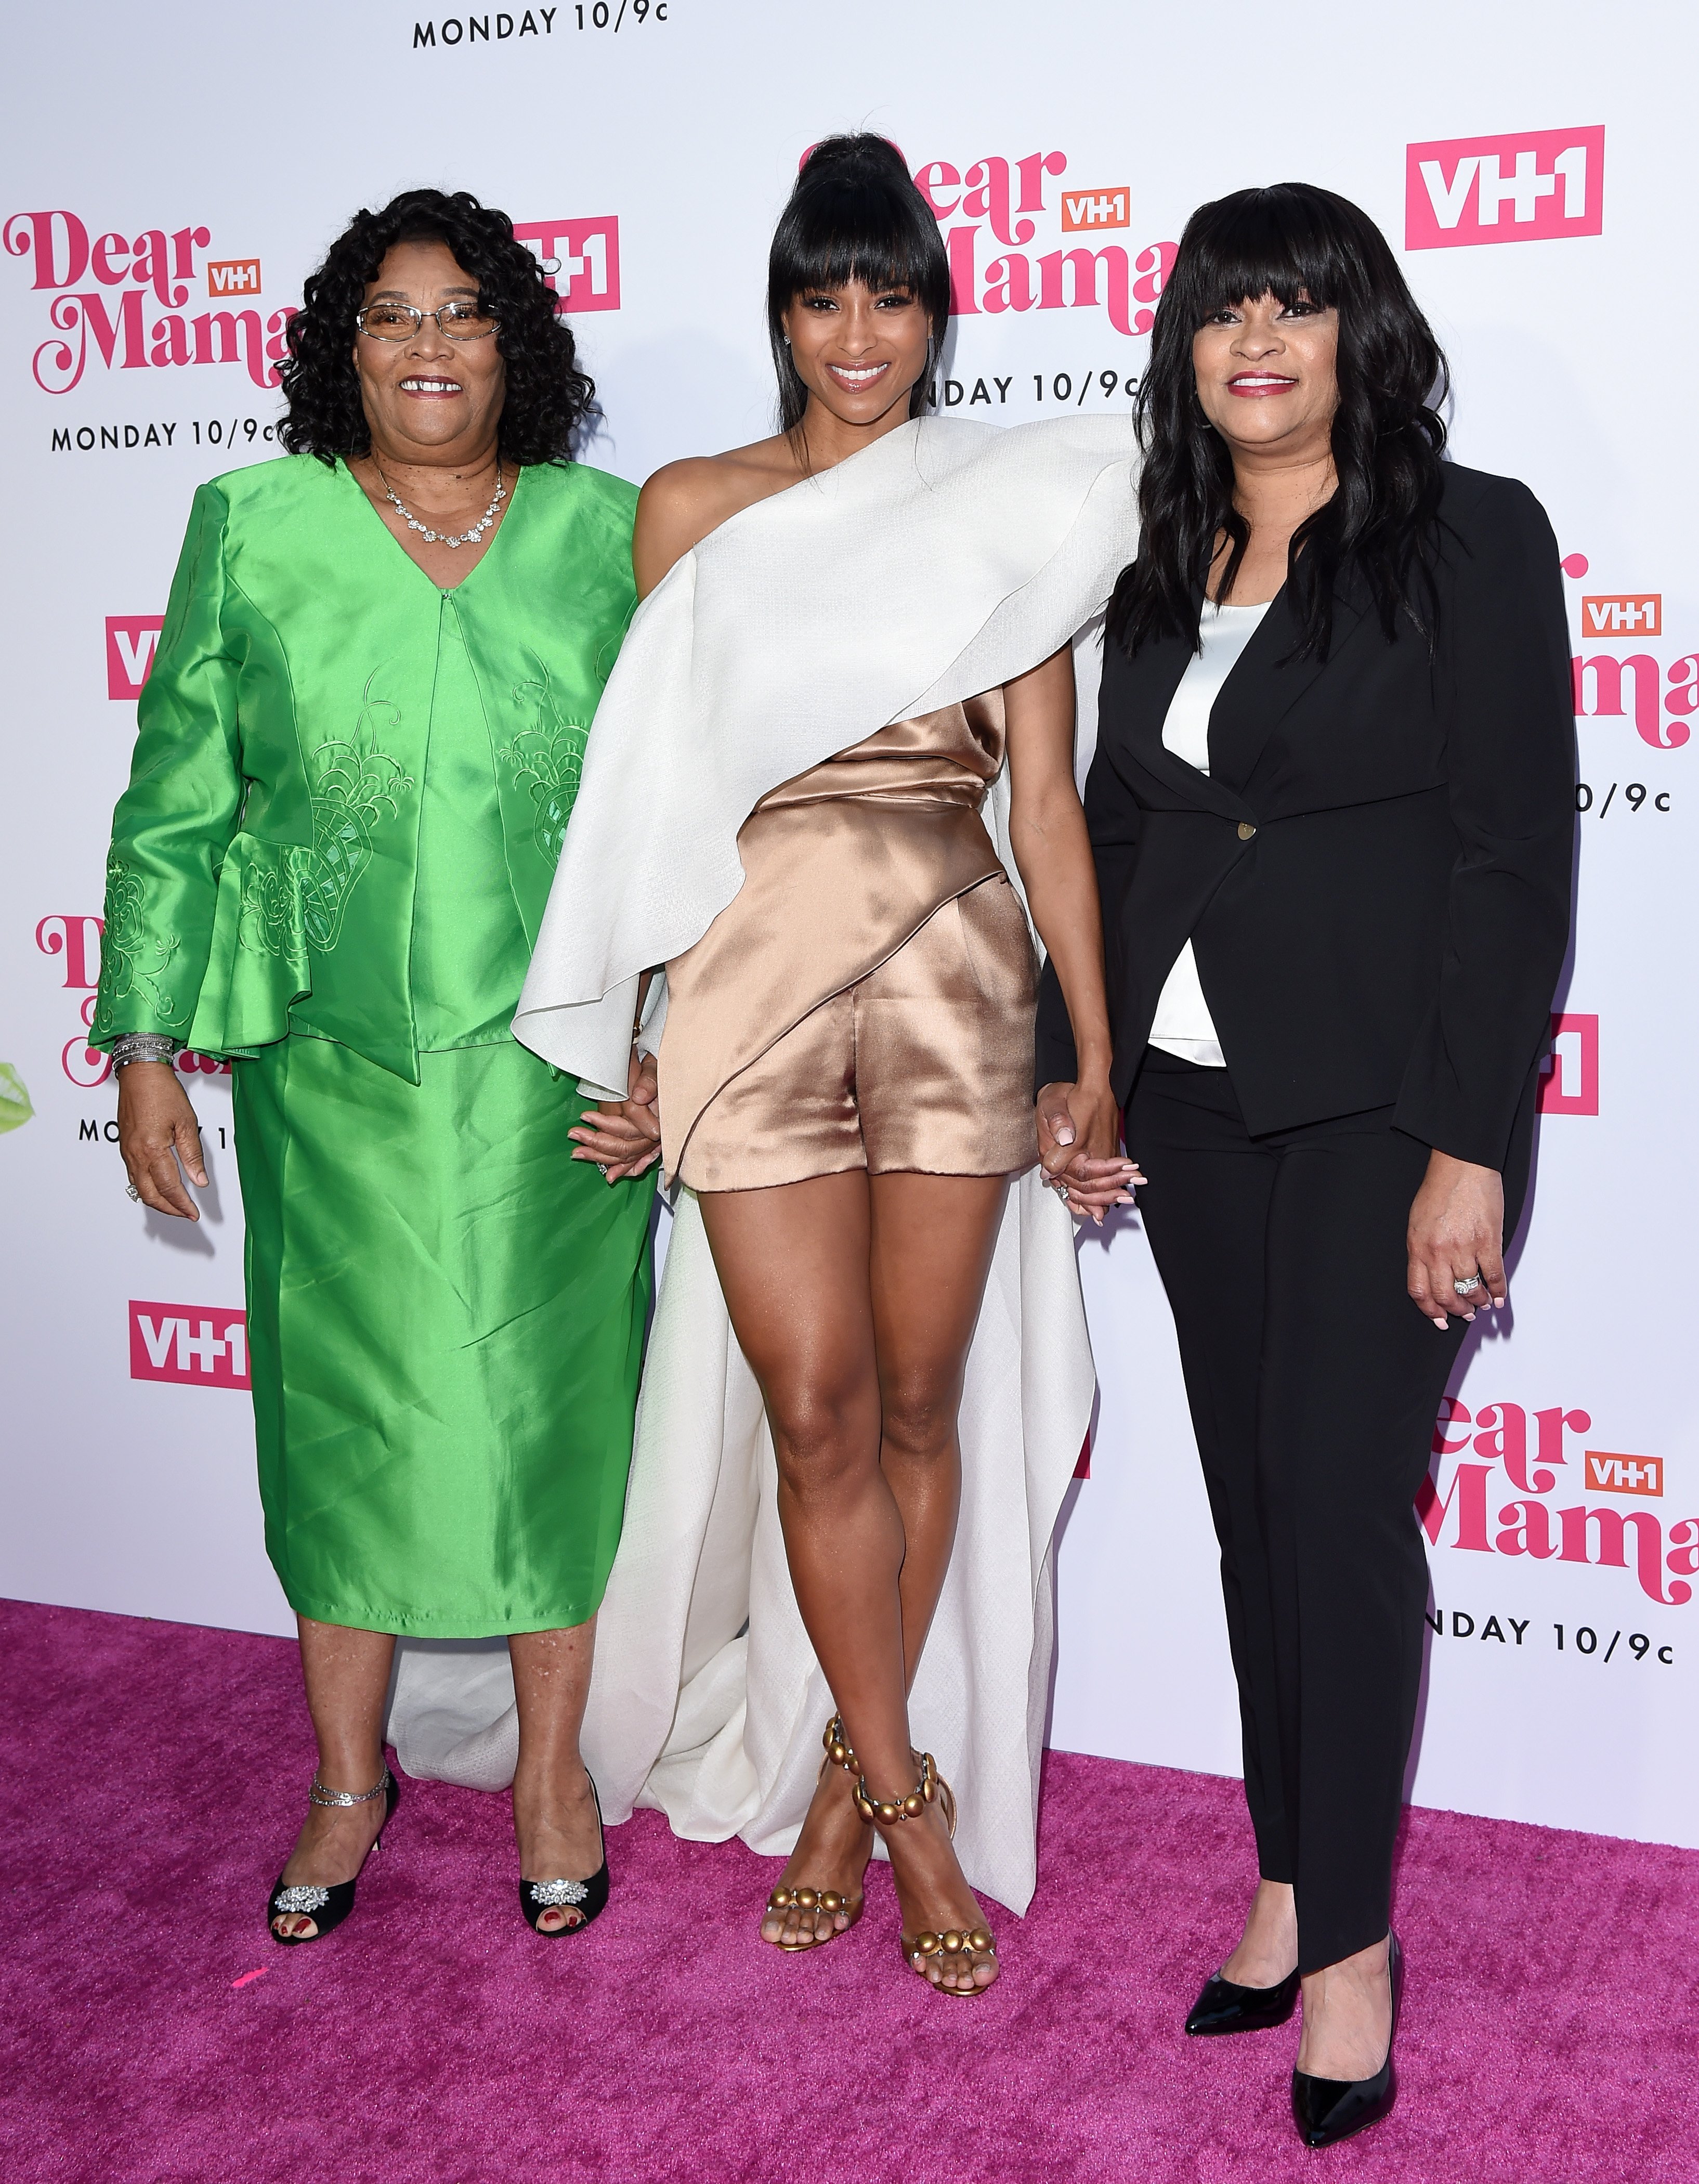 Gladys Stewart, Ciara, and Jackie Harris at the VH1's Annual "Dear Mama: A Love Letter To Mom" at The Theatre at Ace Hotel in Los Angeles, California on May 2, 2019 | Source: Getty Images